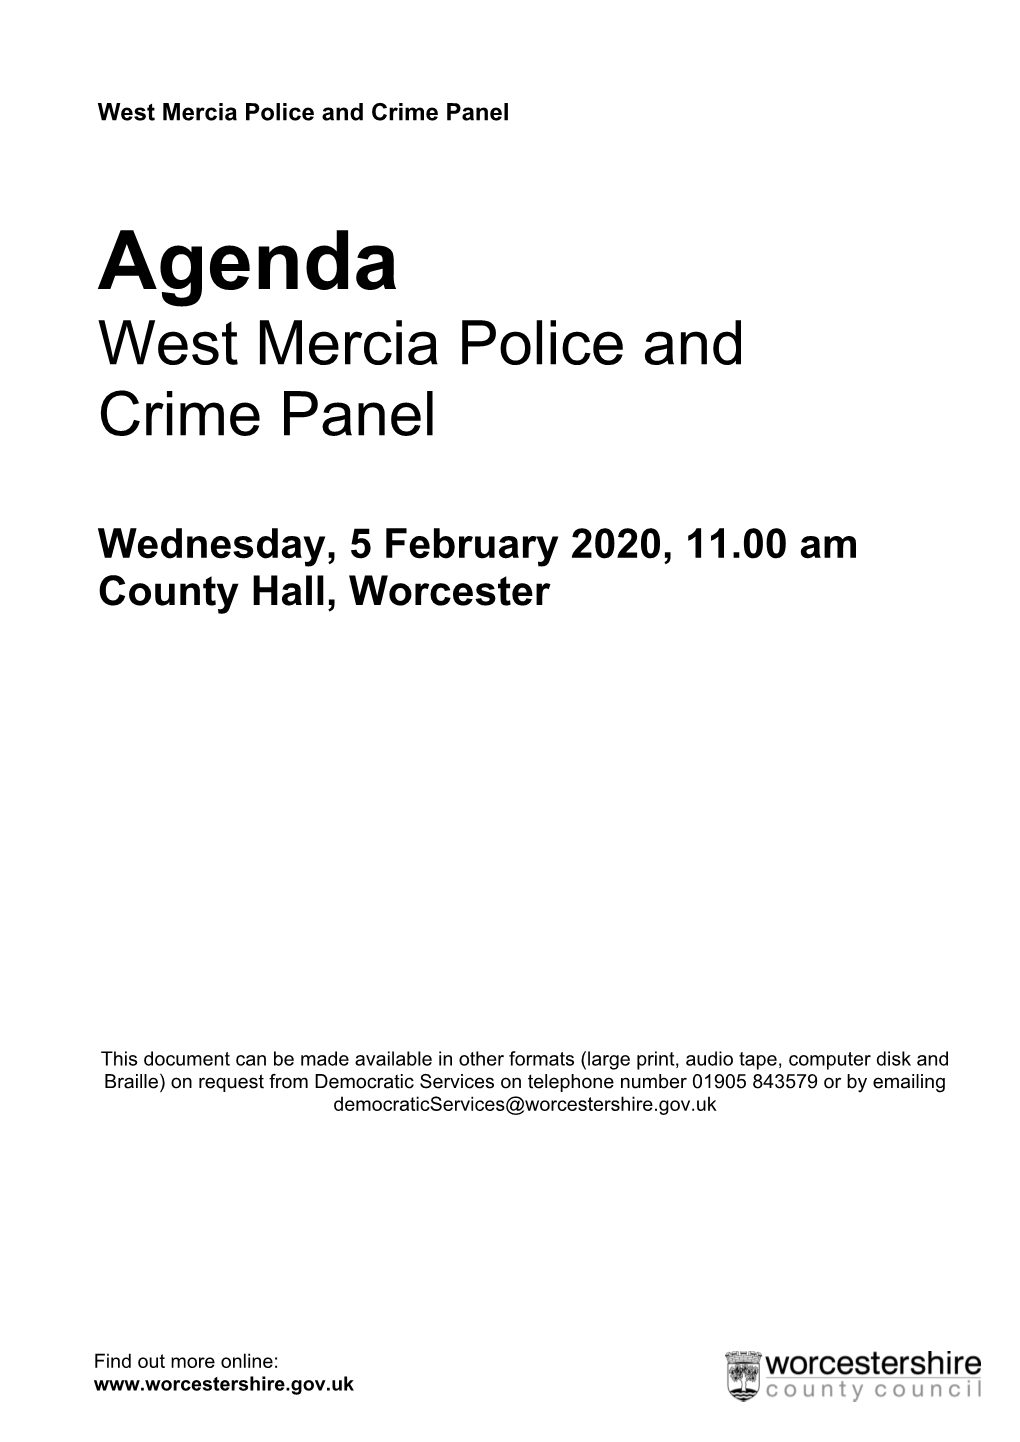 (Public Pack)Agenda Document for West Mercia Police and Crime Panel, 05/02/2020 11:00